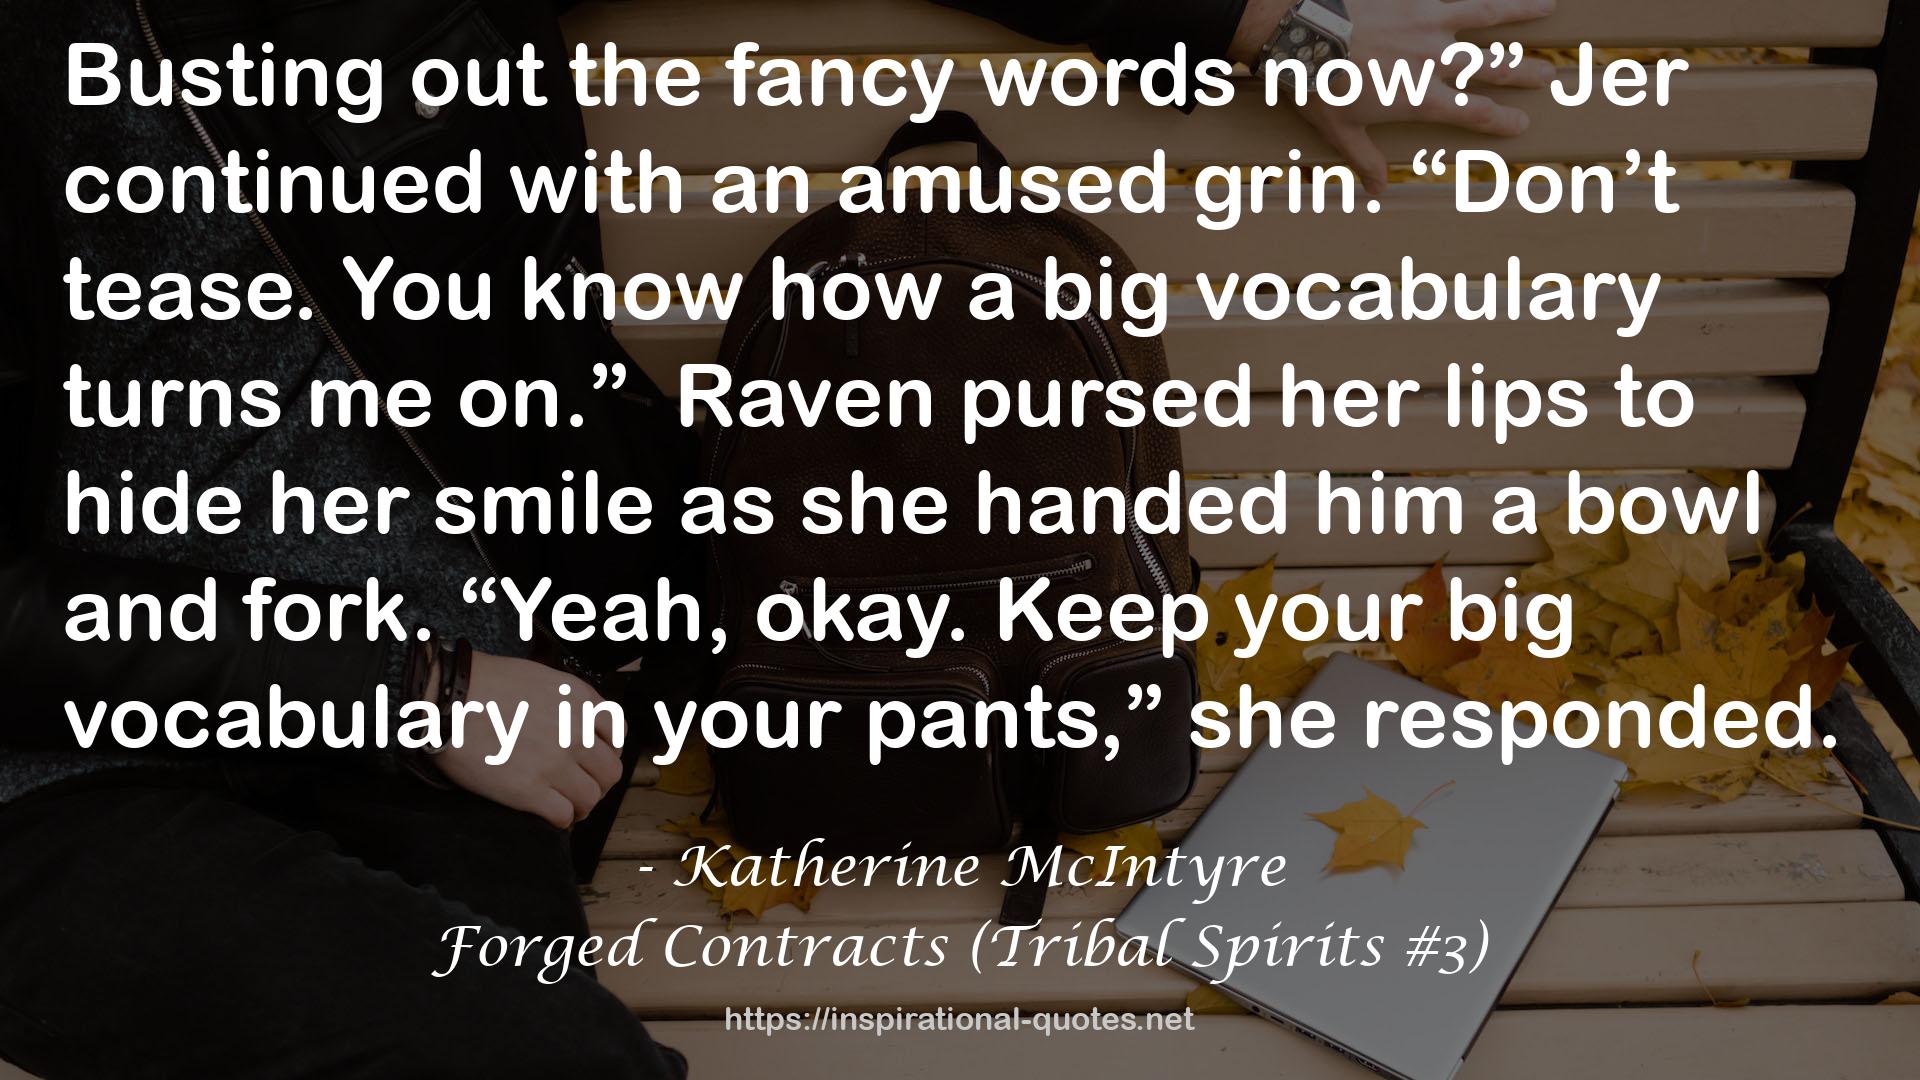 Forged Contracts (Tribal Spirits #3) QUOTES